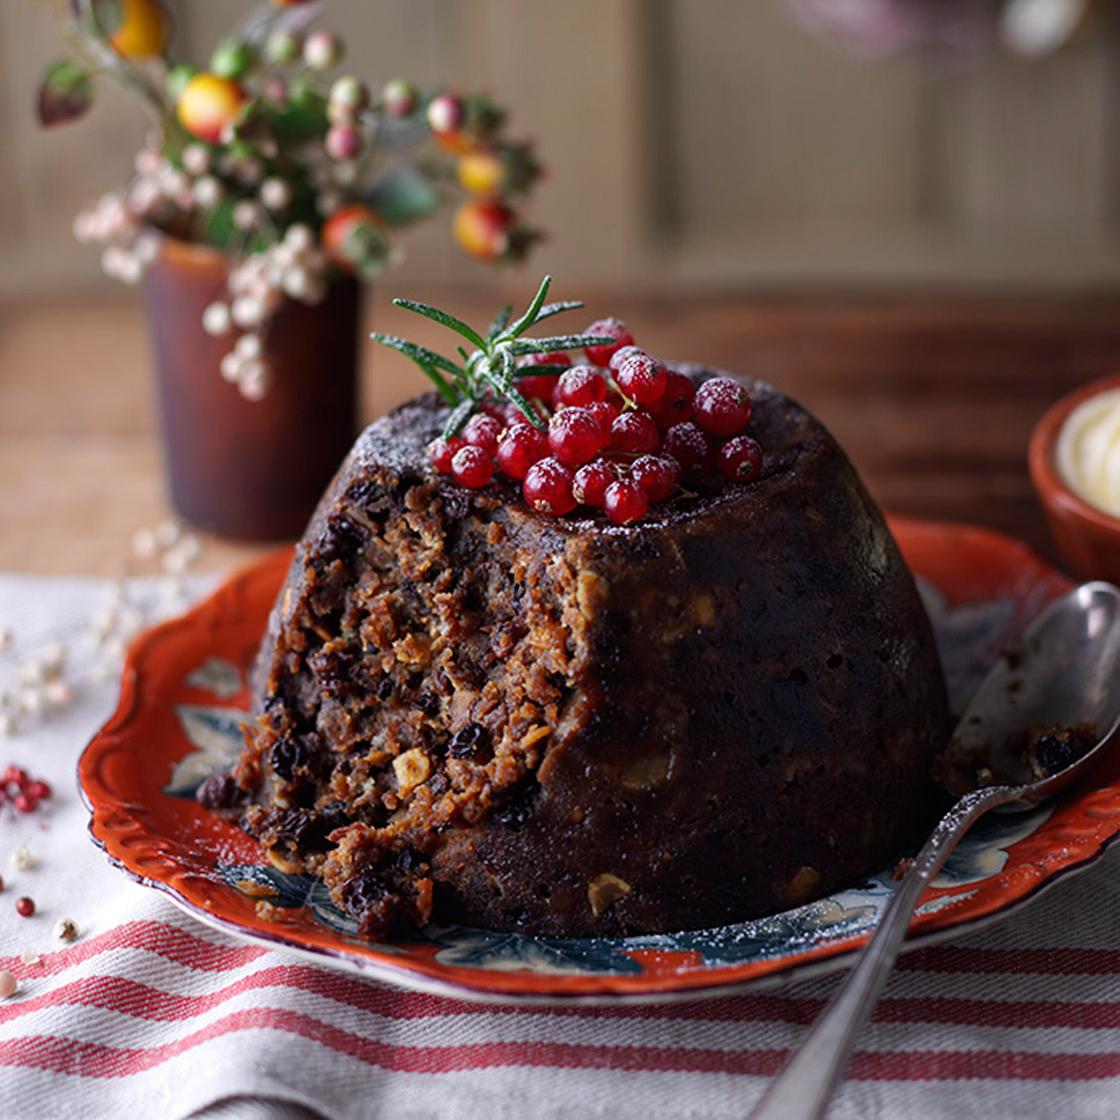 Classic Christmas pudding with brandy butter